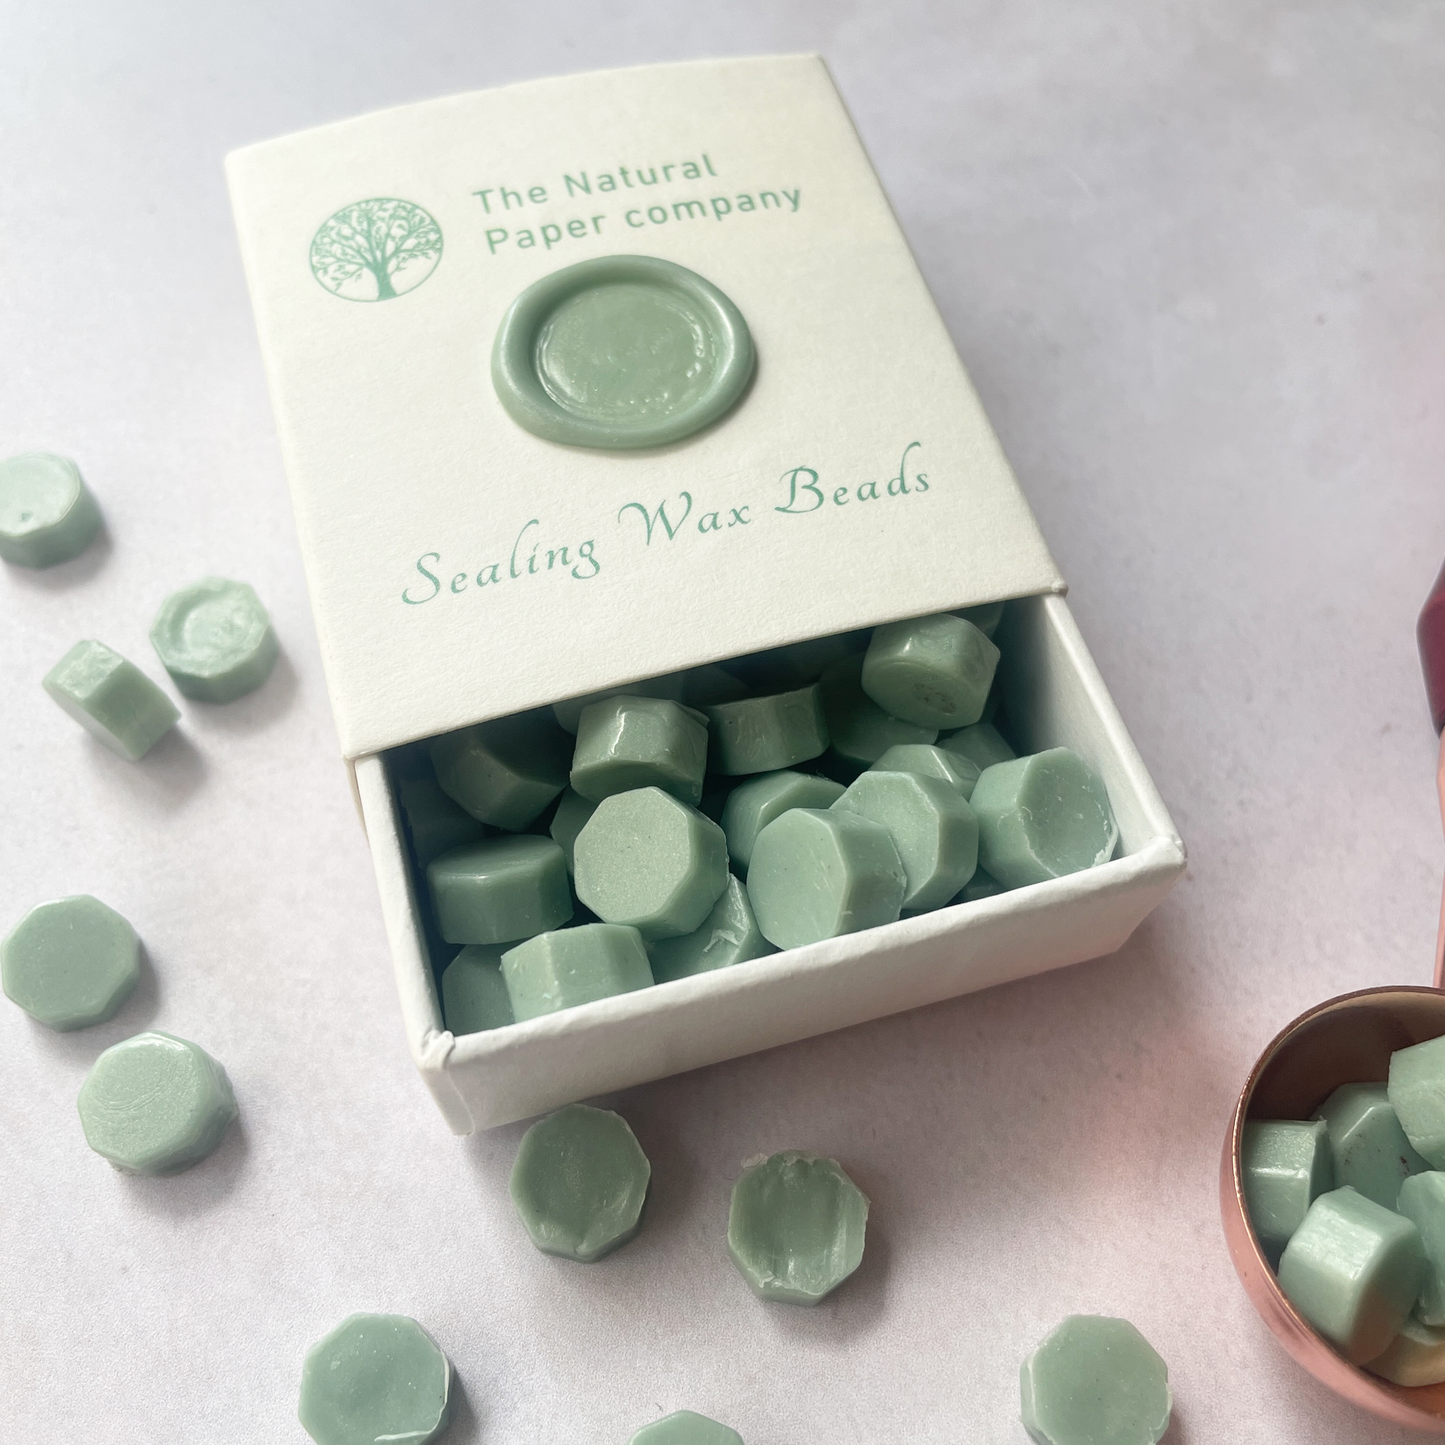 sealing wax beads in sage green colour.  Small beads of wax to make wax seals and stamps.  Perfect for decorating wedding invitations